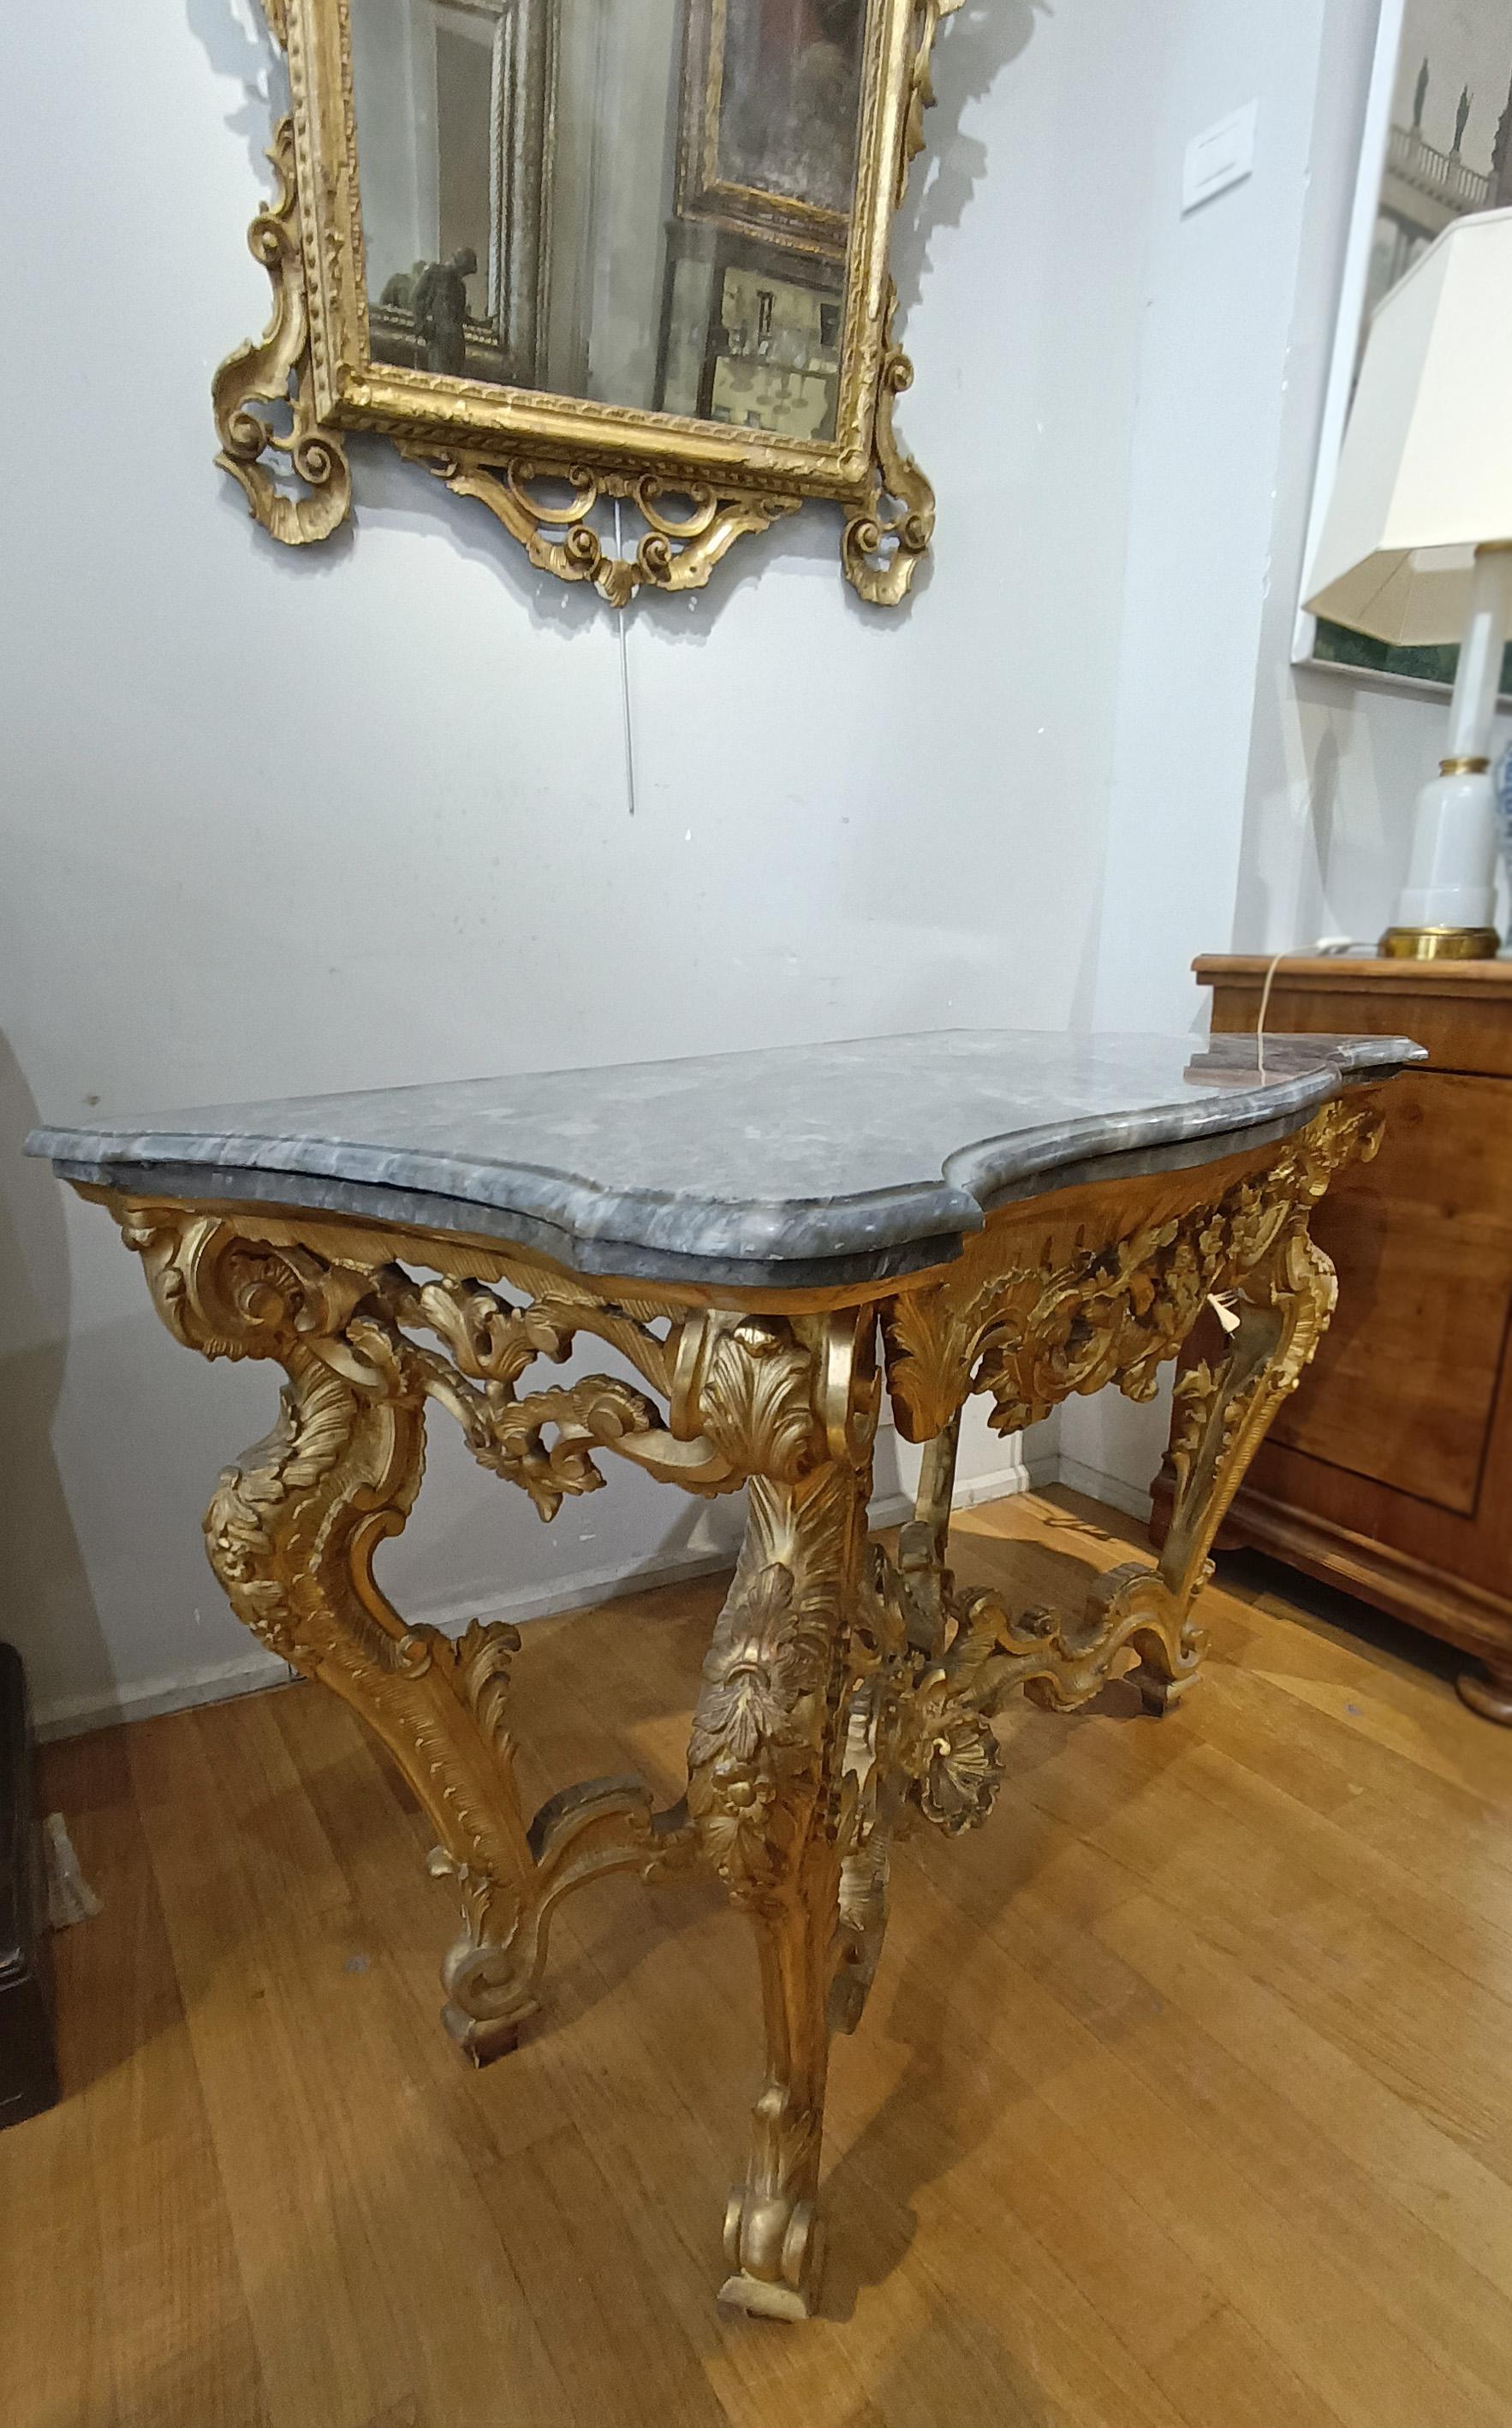 This mid-18th century Tuscan console table, belonging to the Louis XV period, is a piece of furniture of great elegance. Expertly crafted from fine pine wood, it was carved and gilded with extreme care, giving the piece a refined appearance. The